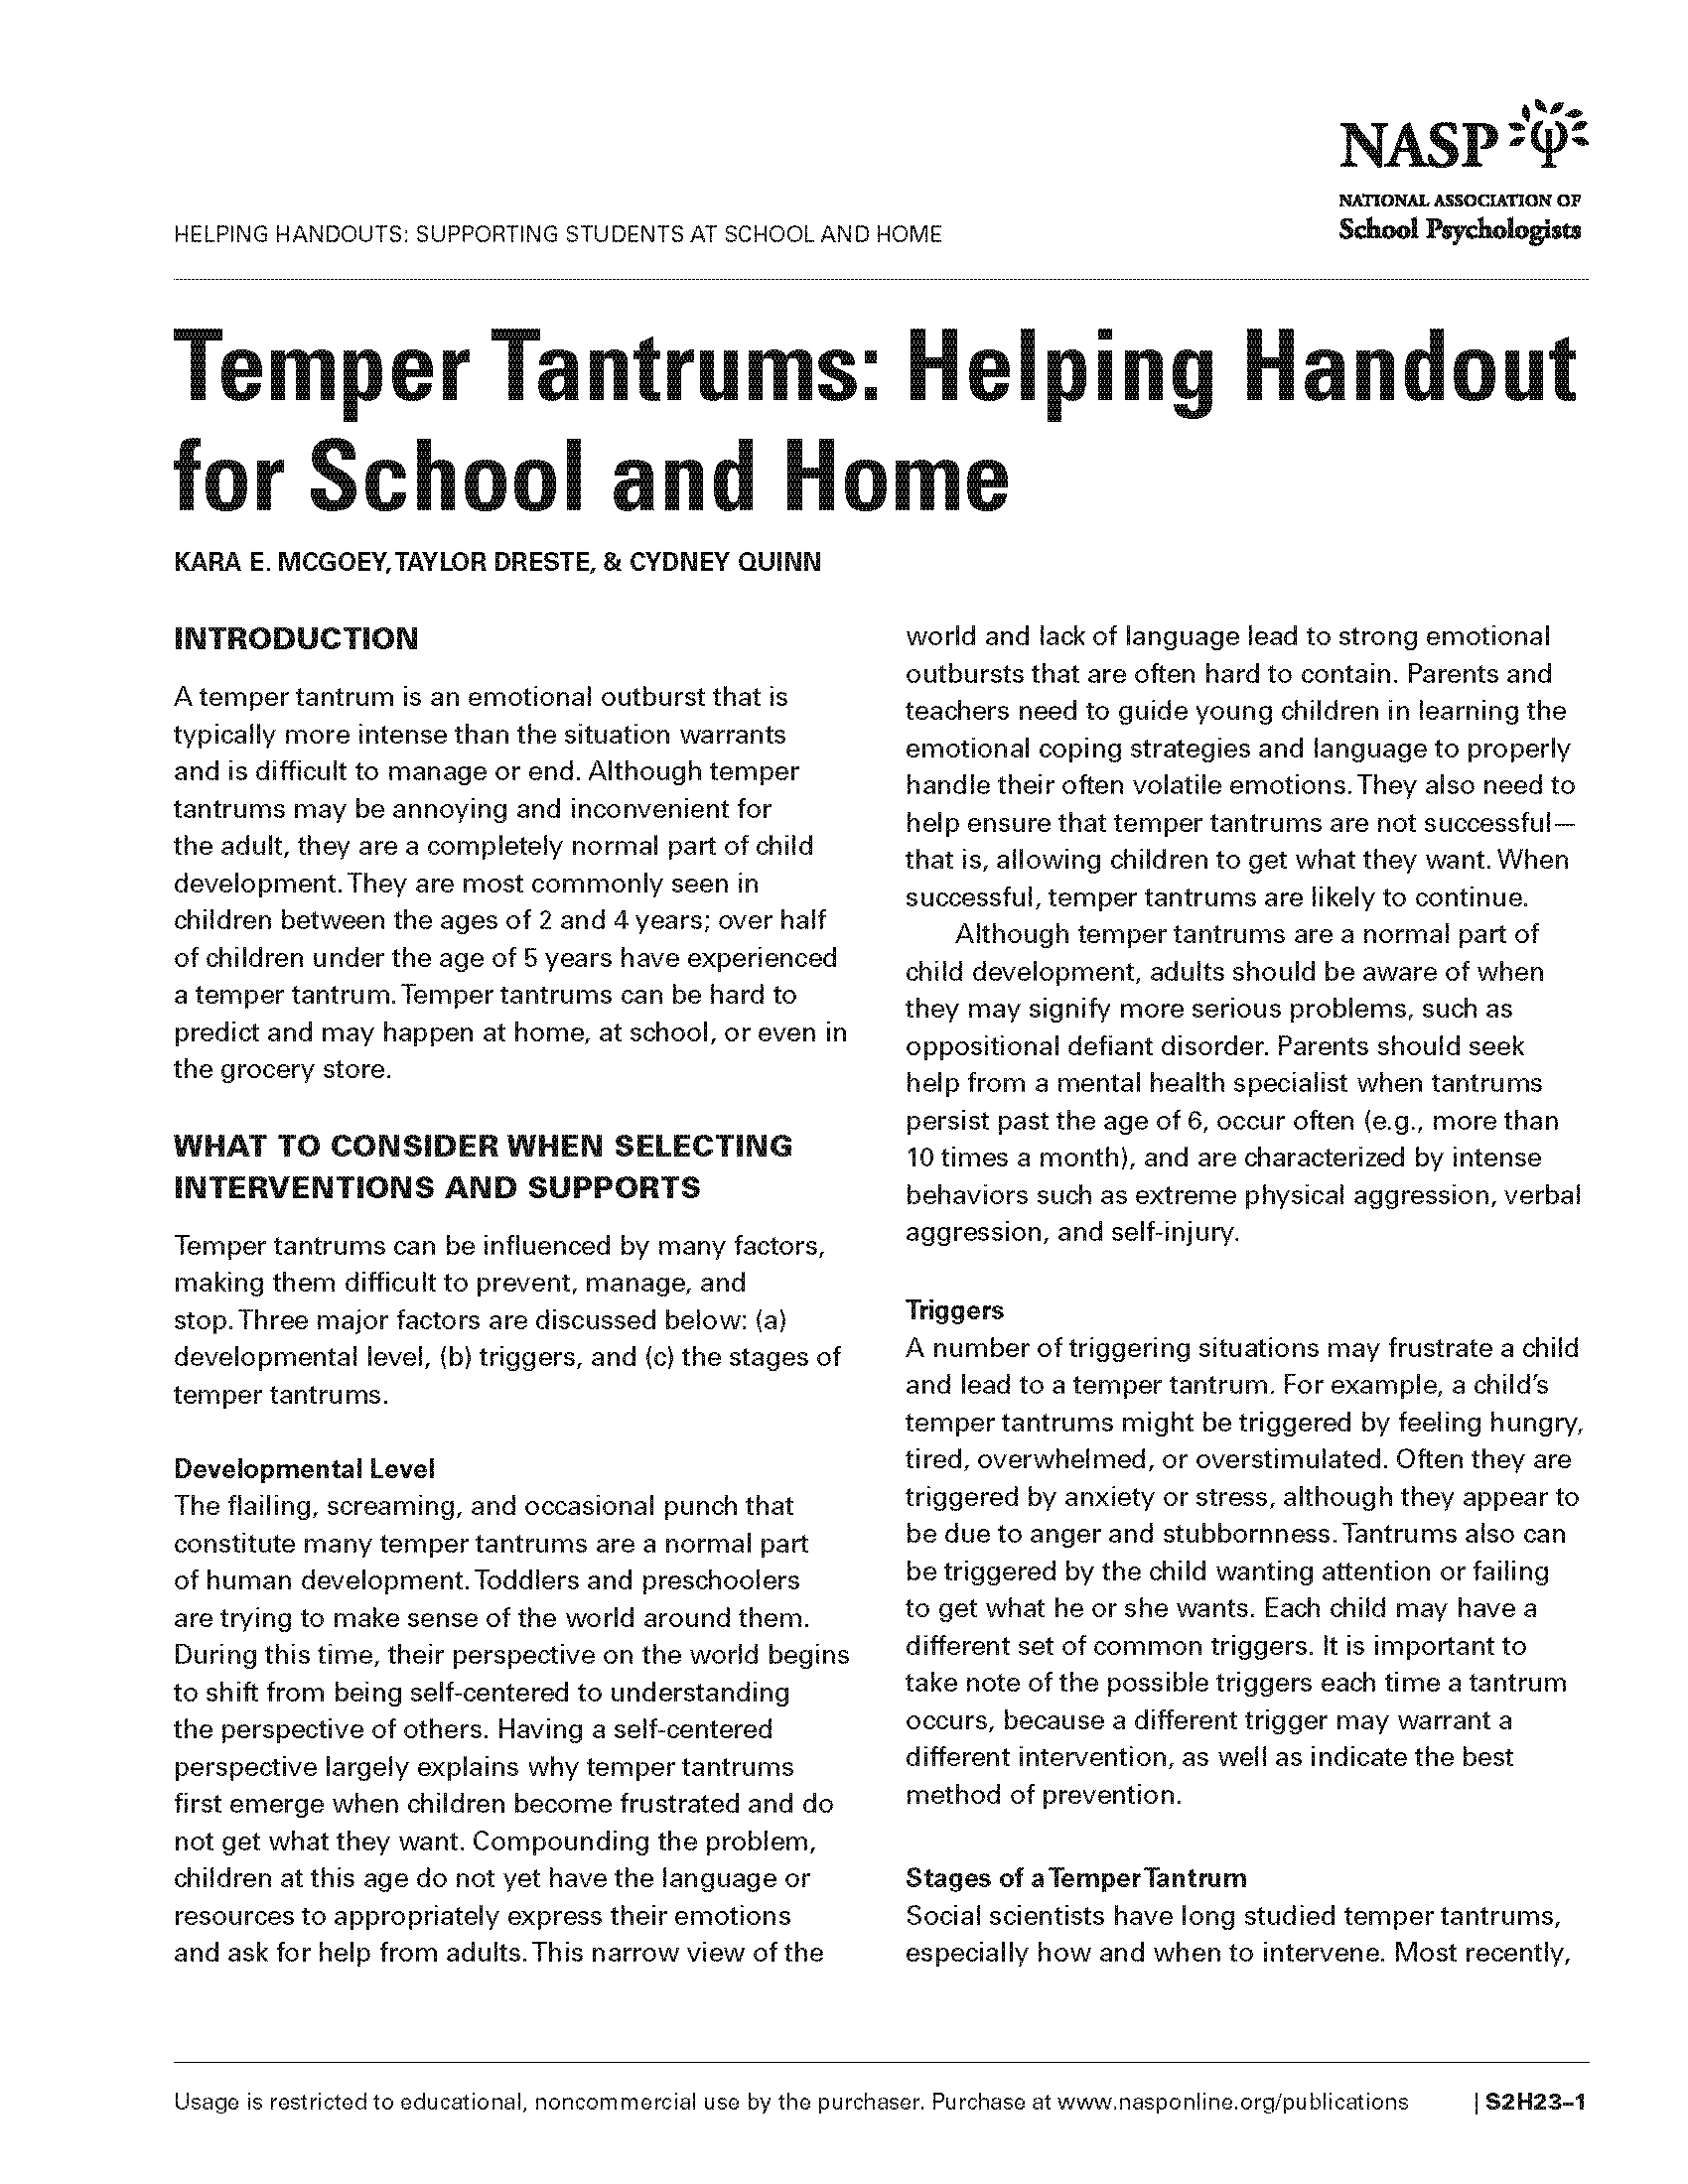 Temper Tantrums: Helping Handout for School and Home